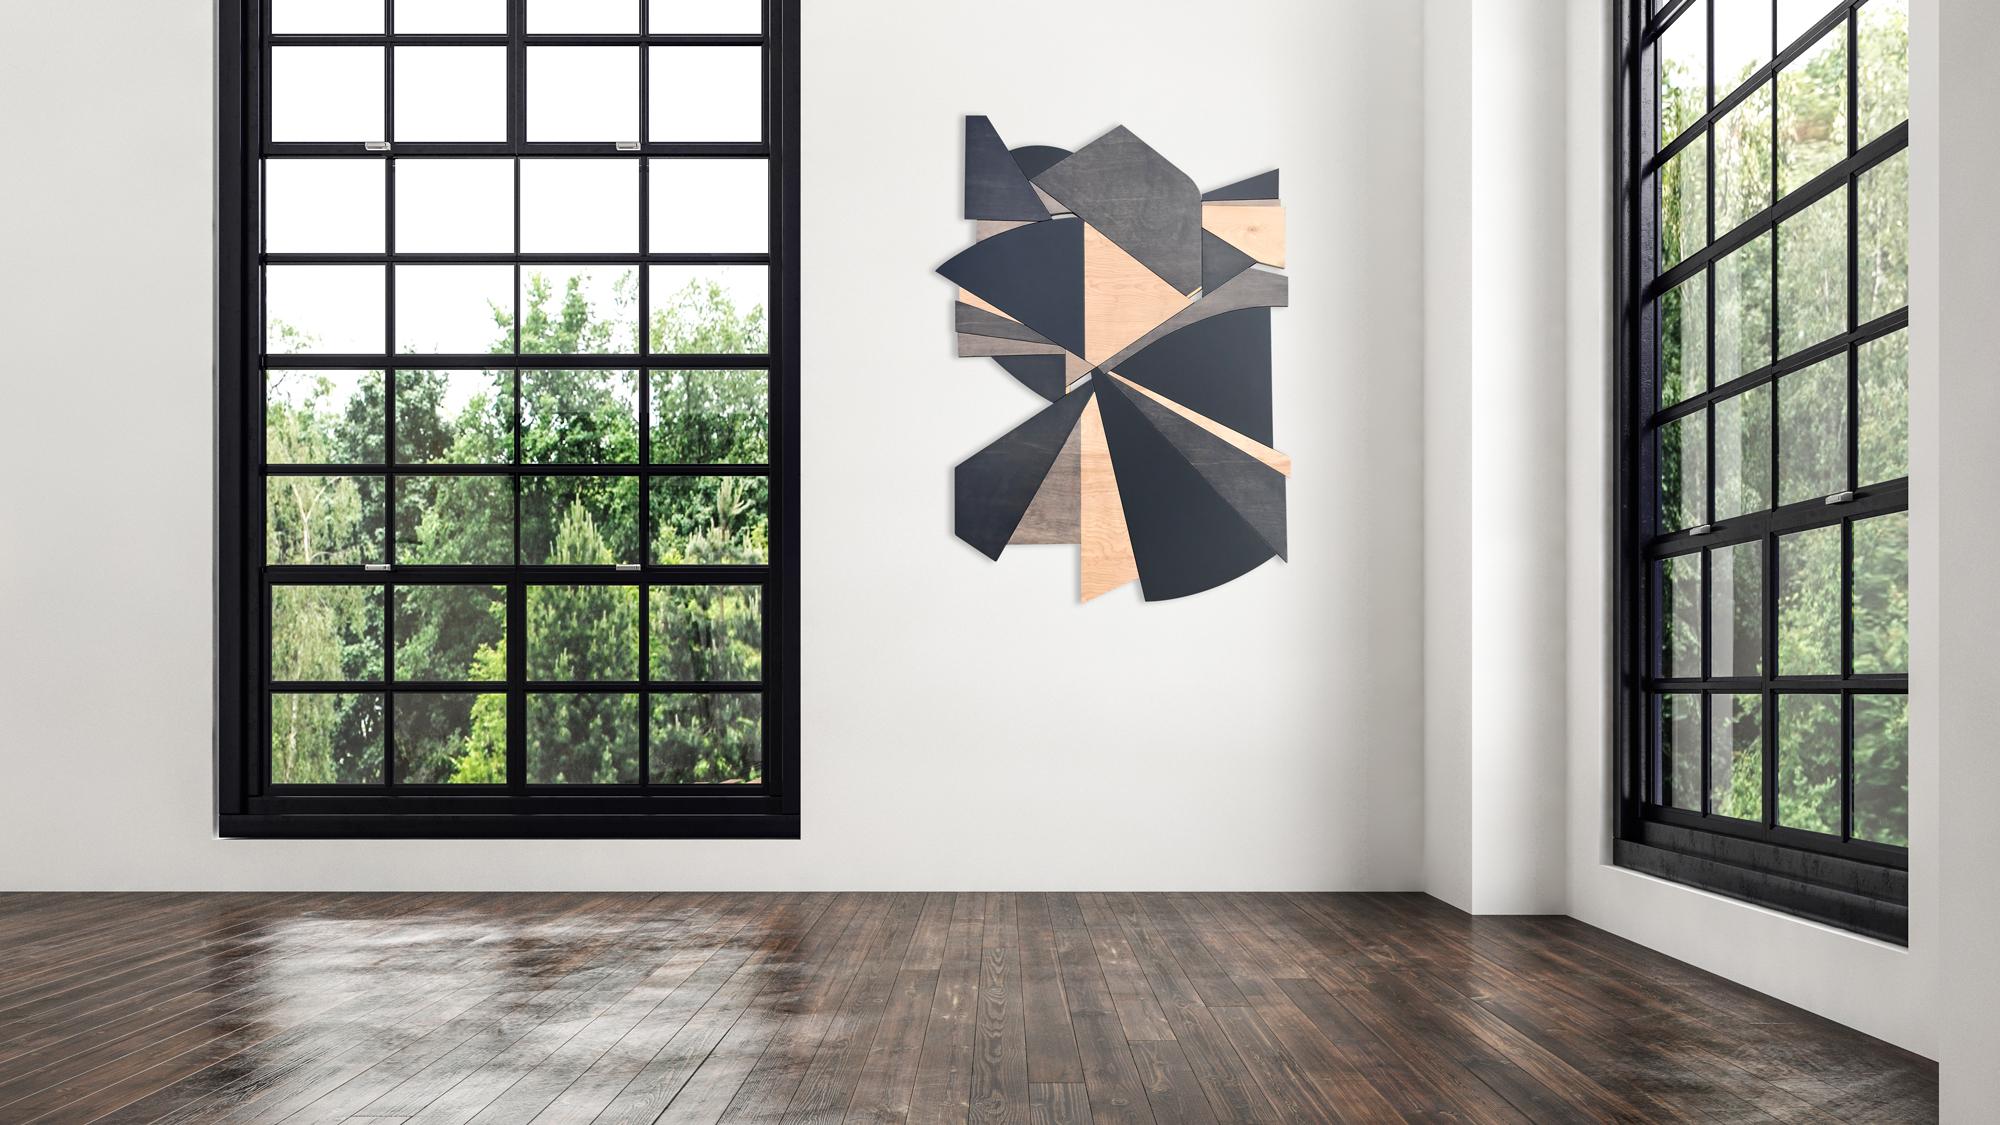 Deceptor is a minimalist, monochromatic and contemporary wall sculpture. It is constructed with birch panels, acrylic washes and completed with a satin lacquer finish. The paint is slightly distressed giving the piece more texture and interest. The